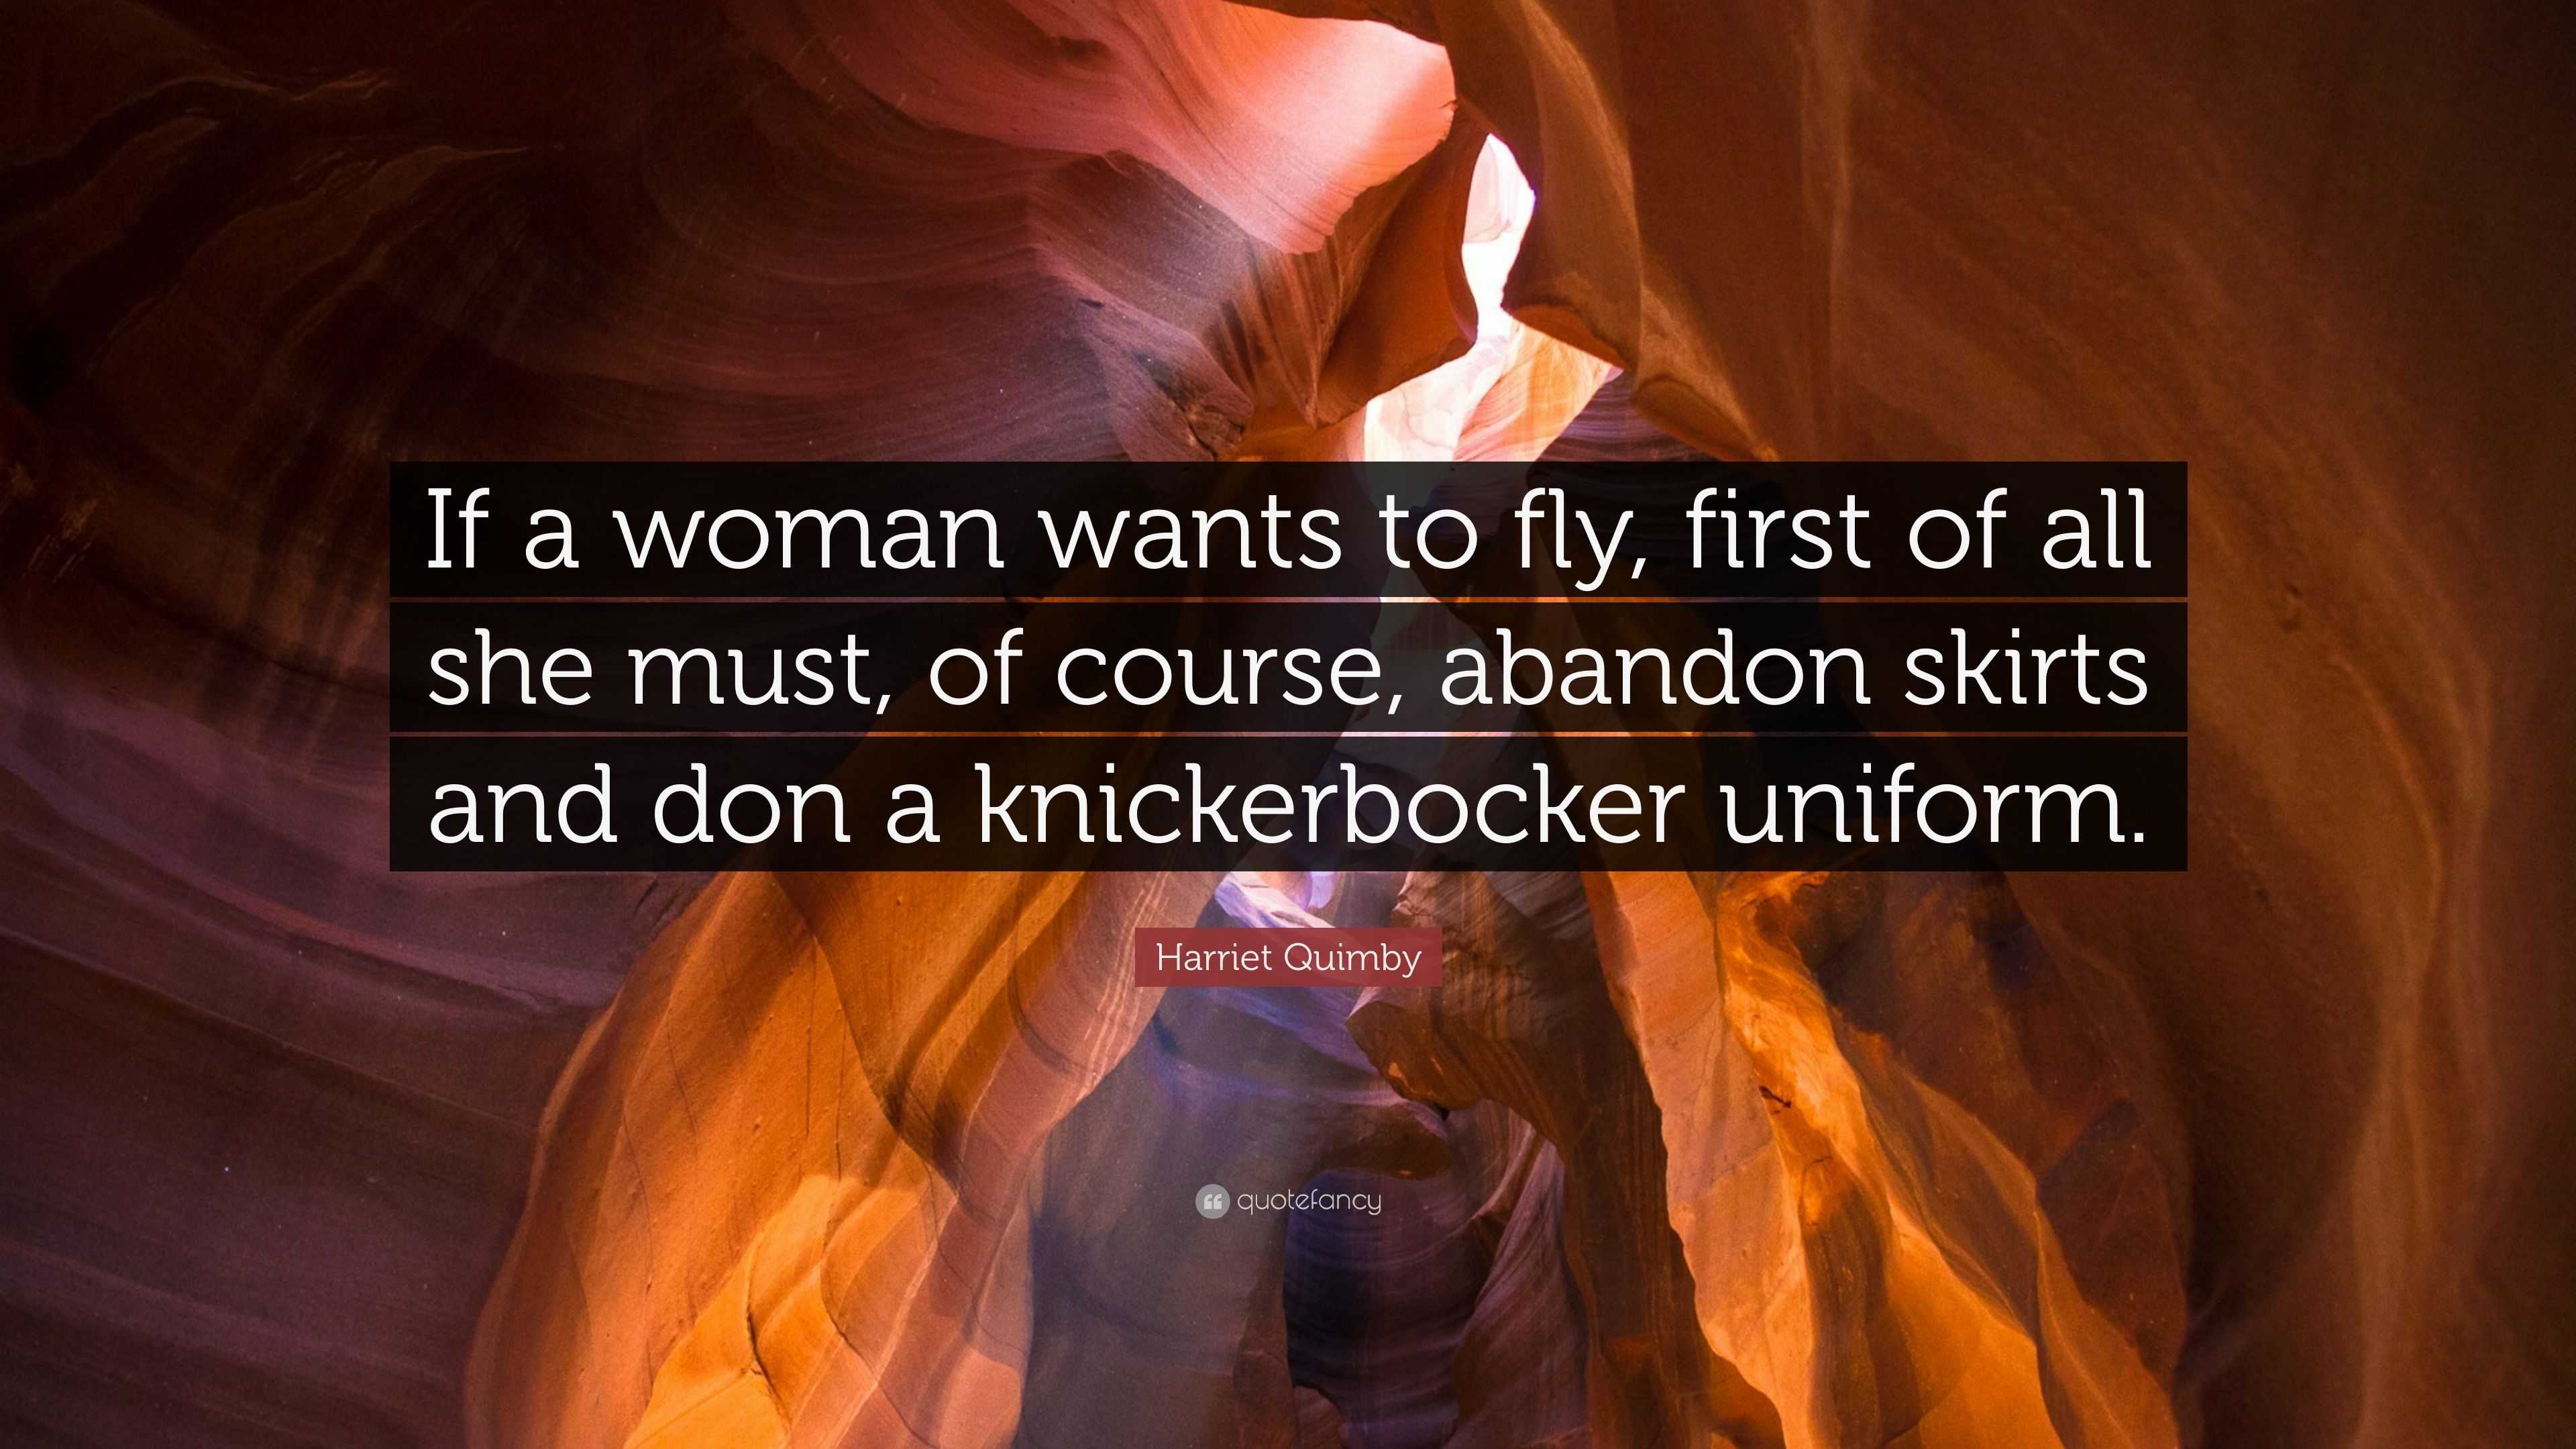 Harriet Quimby Quote: “If a woman wants to fly, first of all she must, of  course